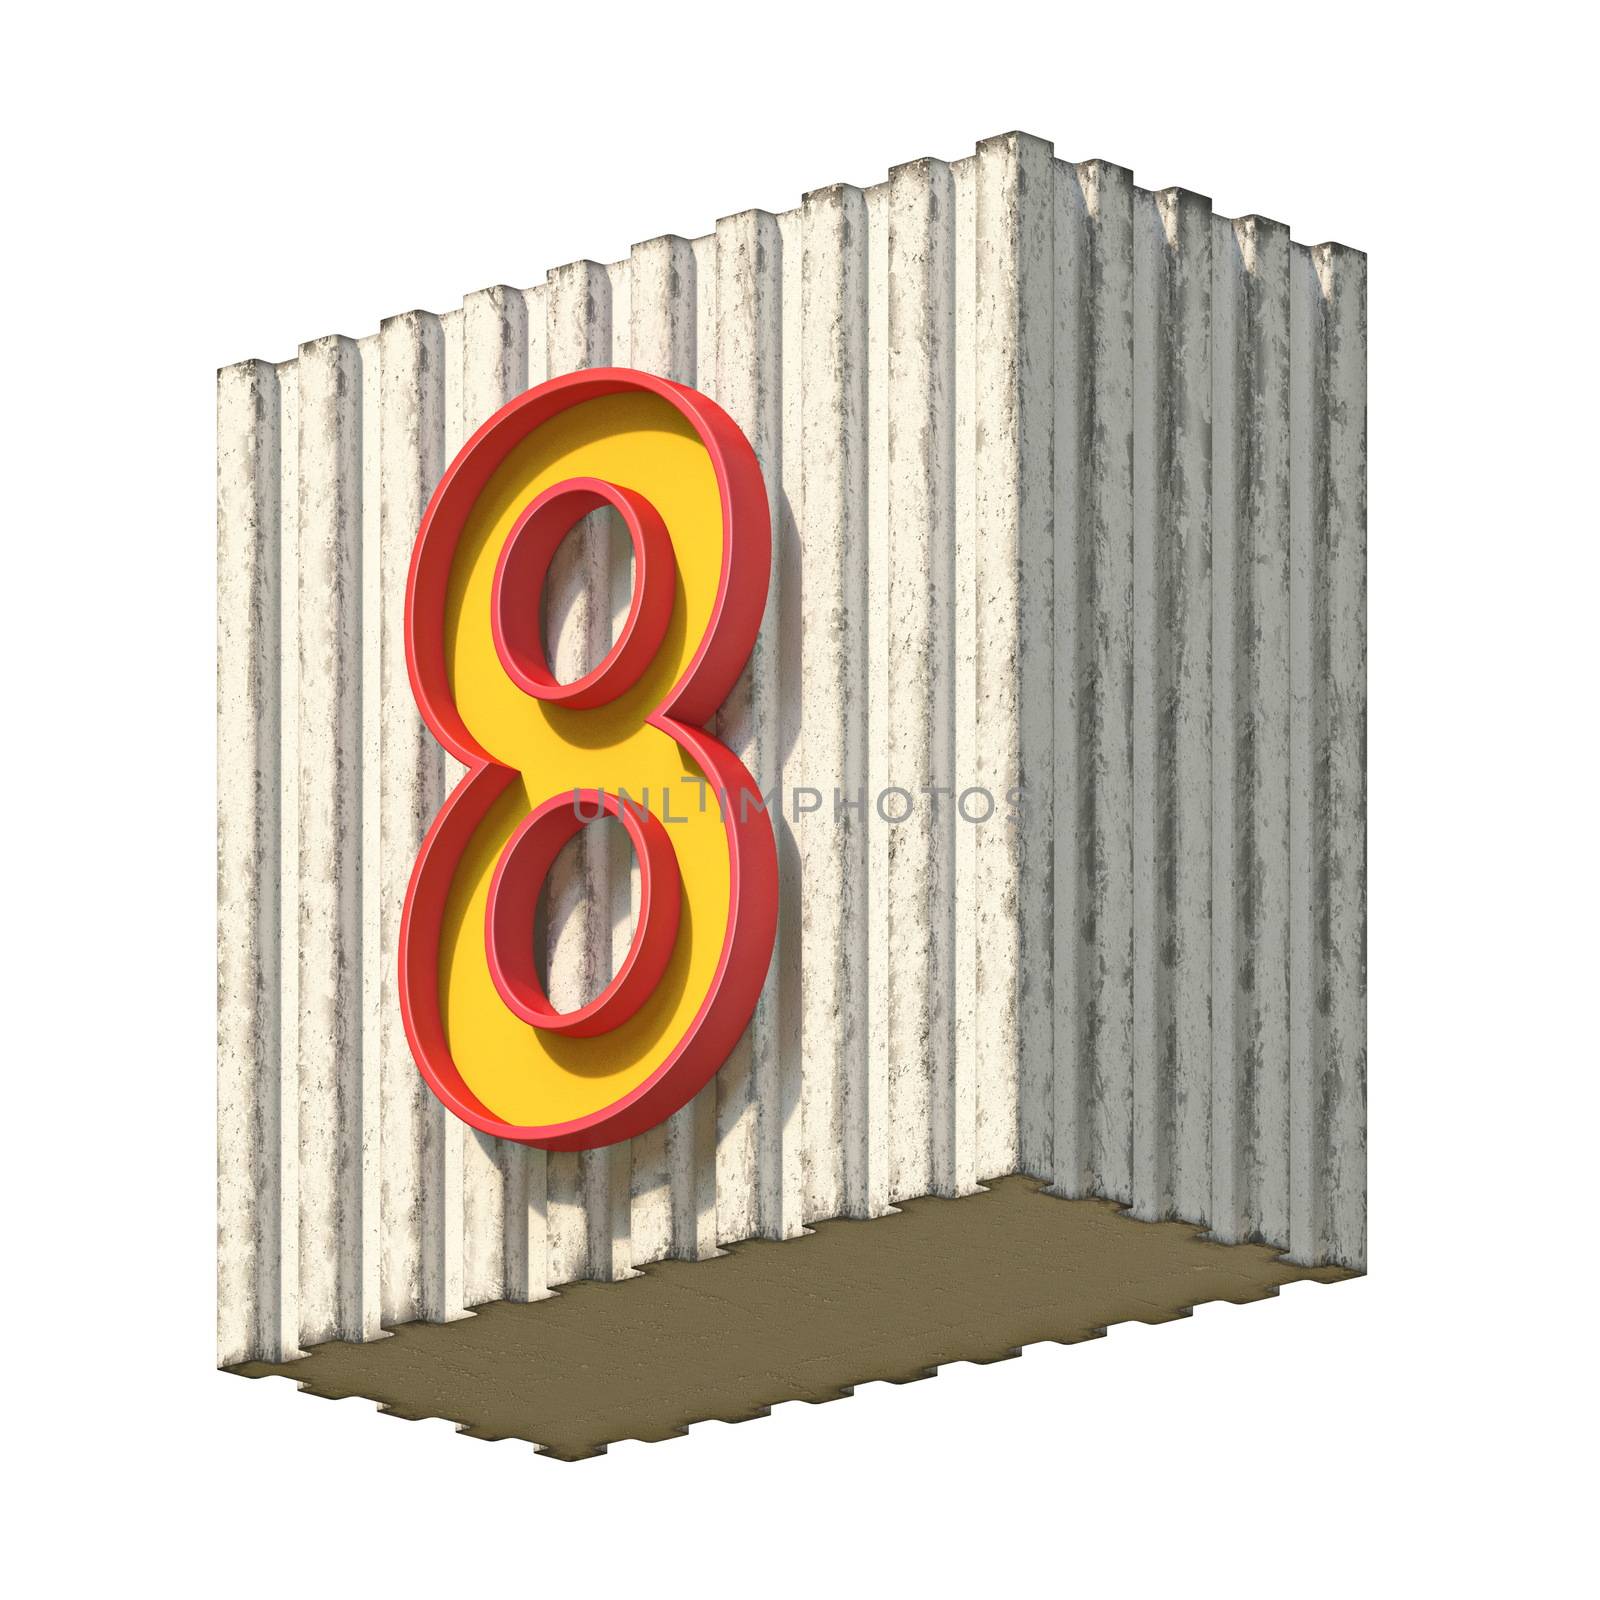 Vintage concrete red yellow Number 8 3D render illustration isolated on white background